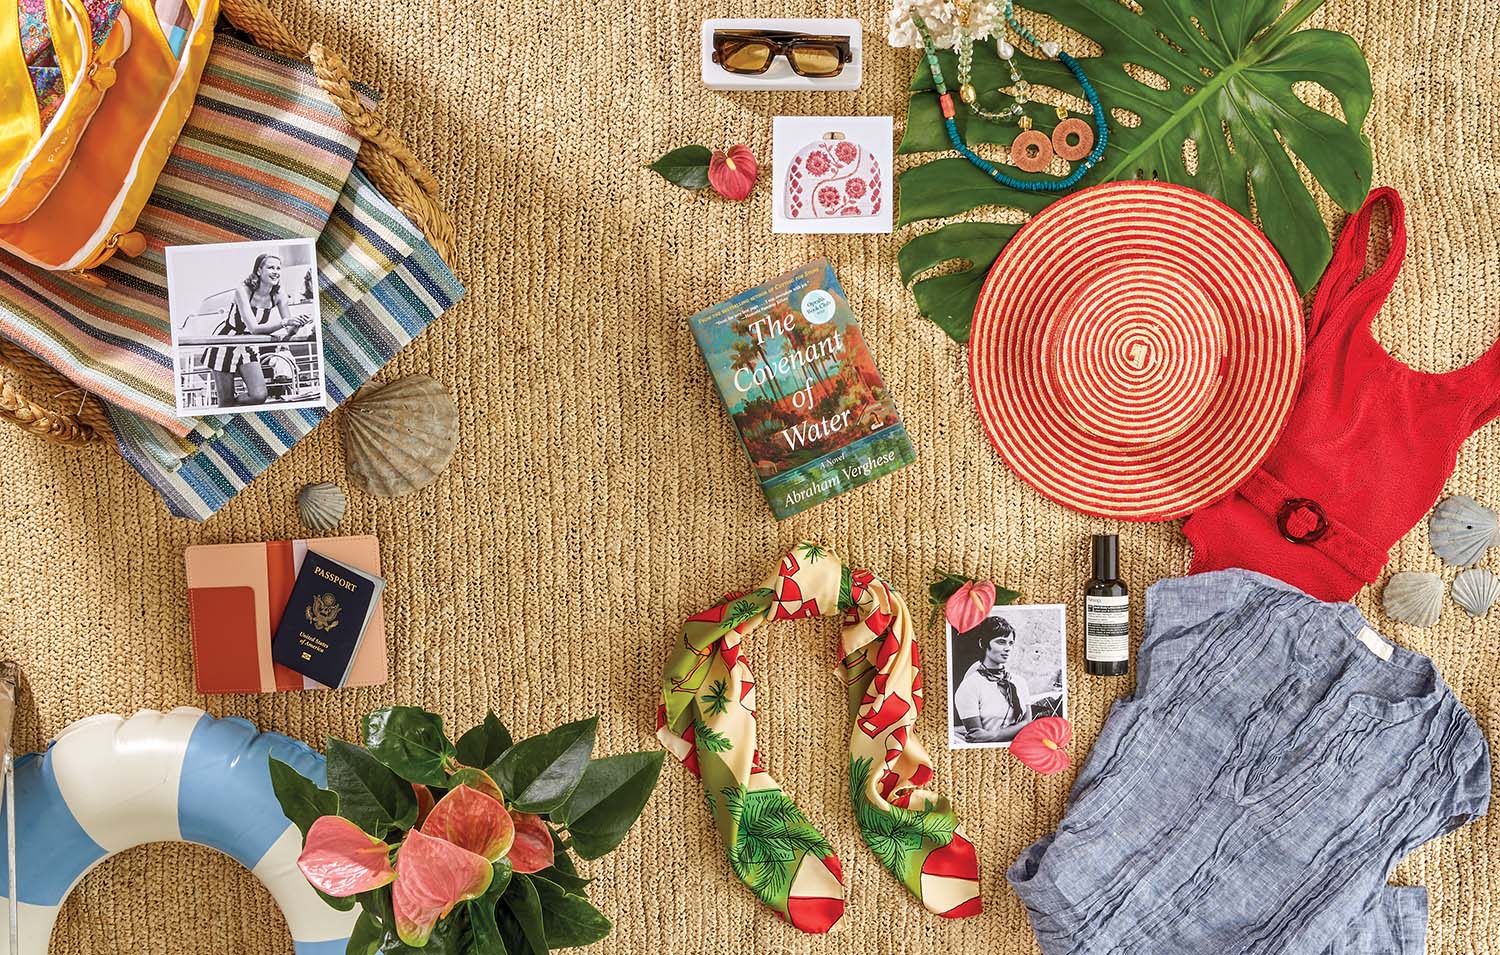 Resort items like hats, sunglasses and swimsuits sit on a rattan mat.